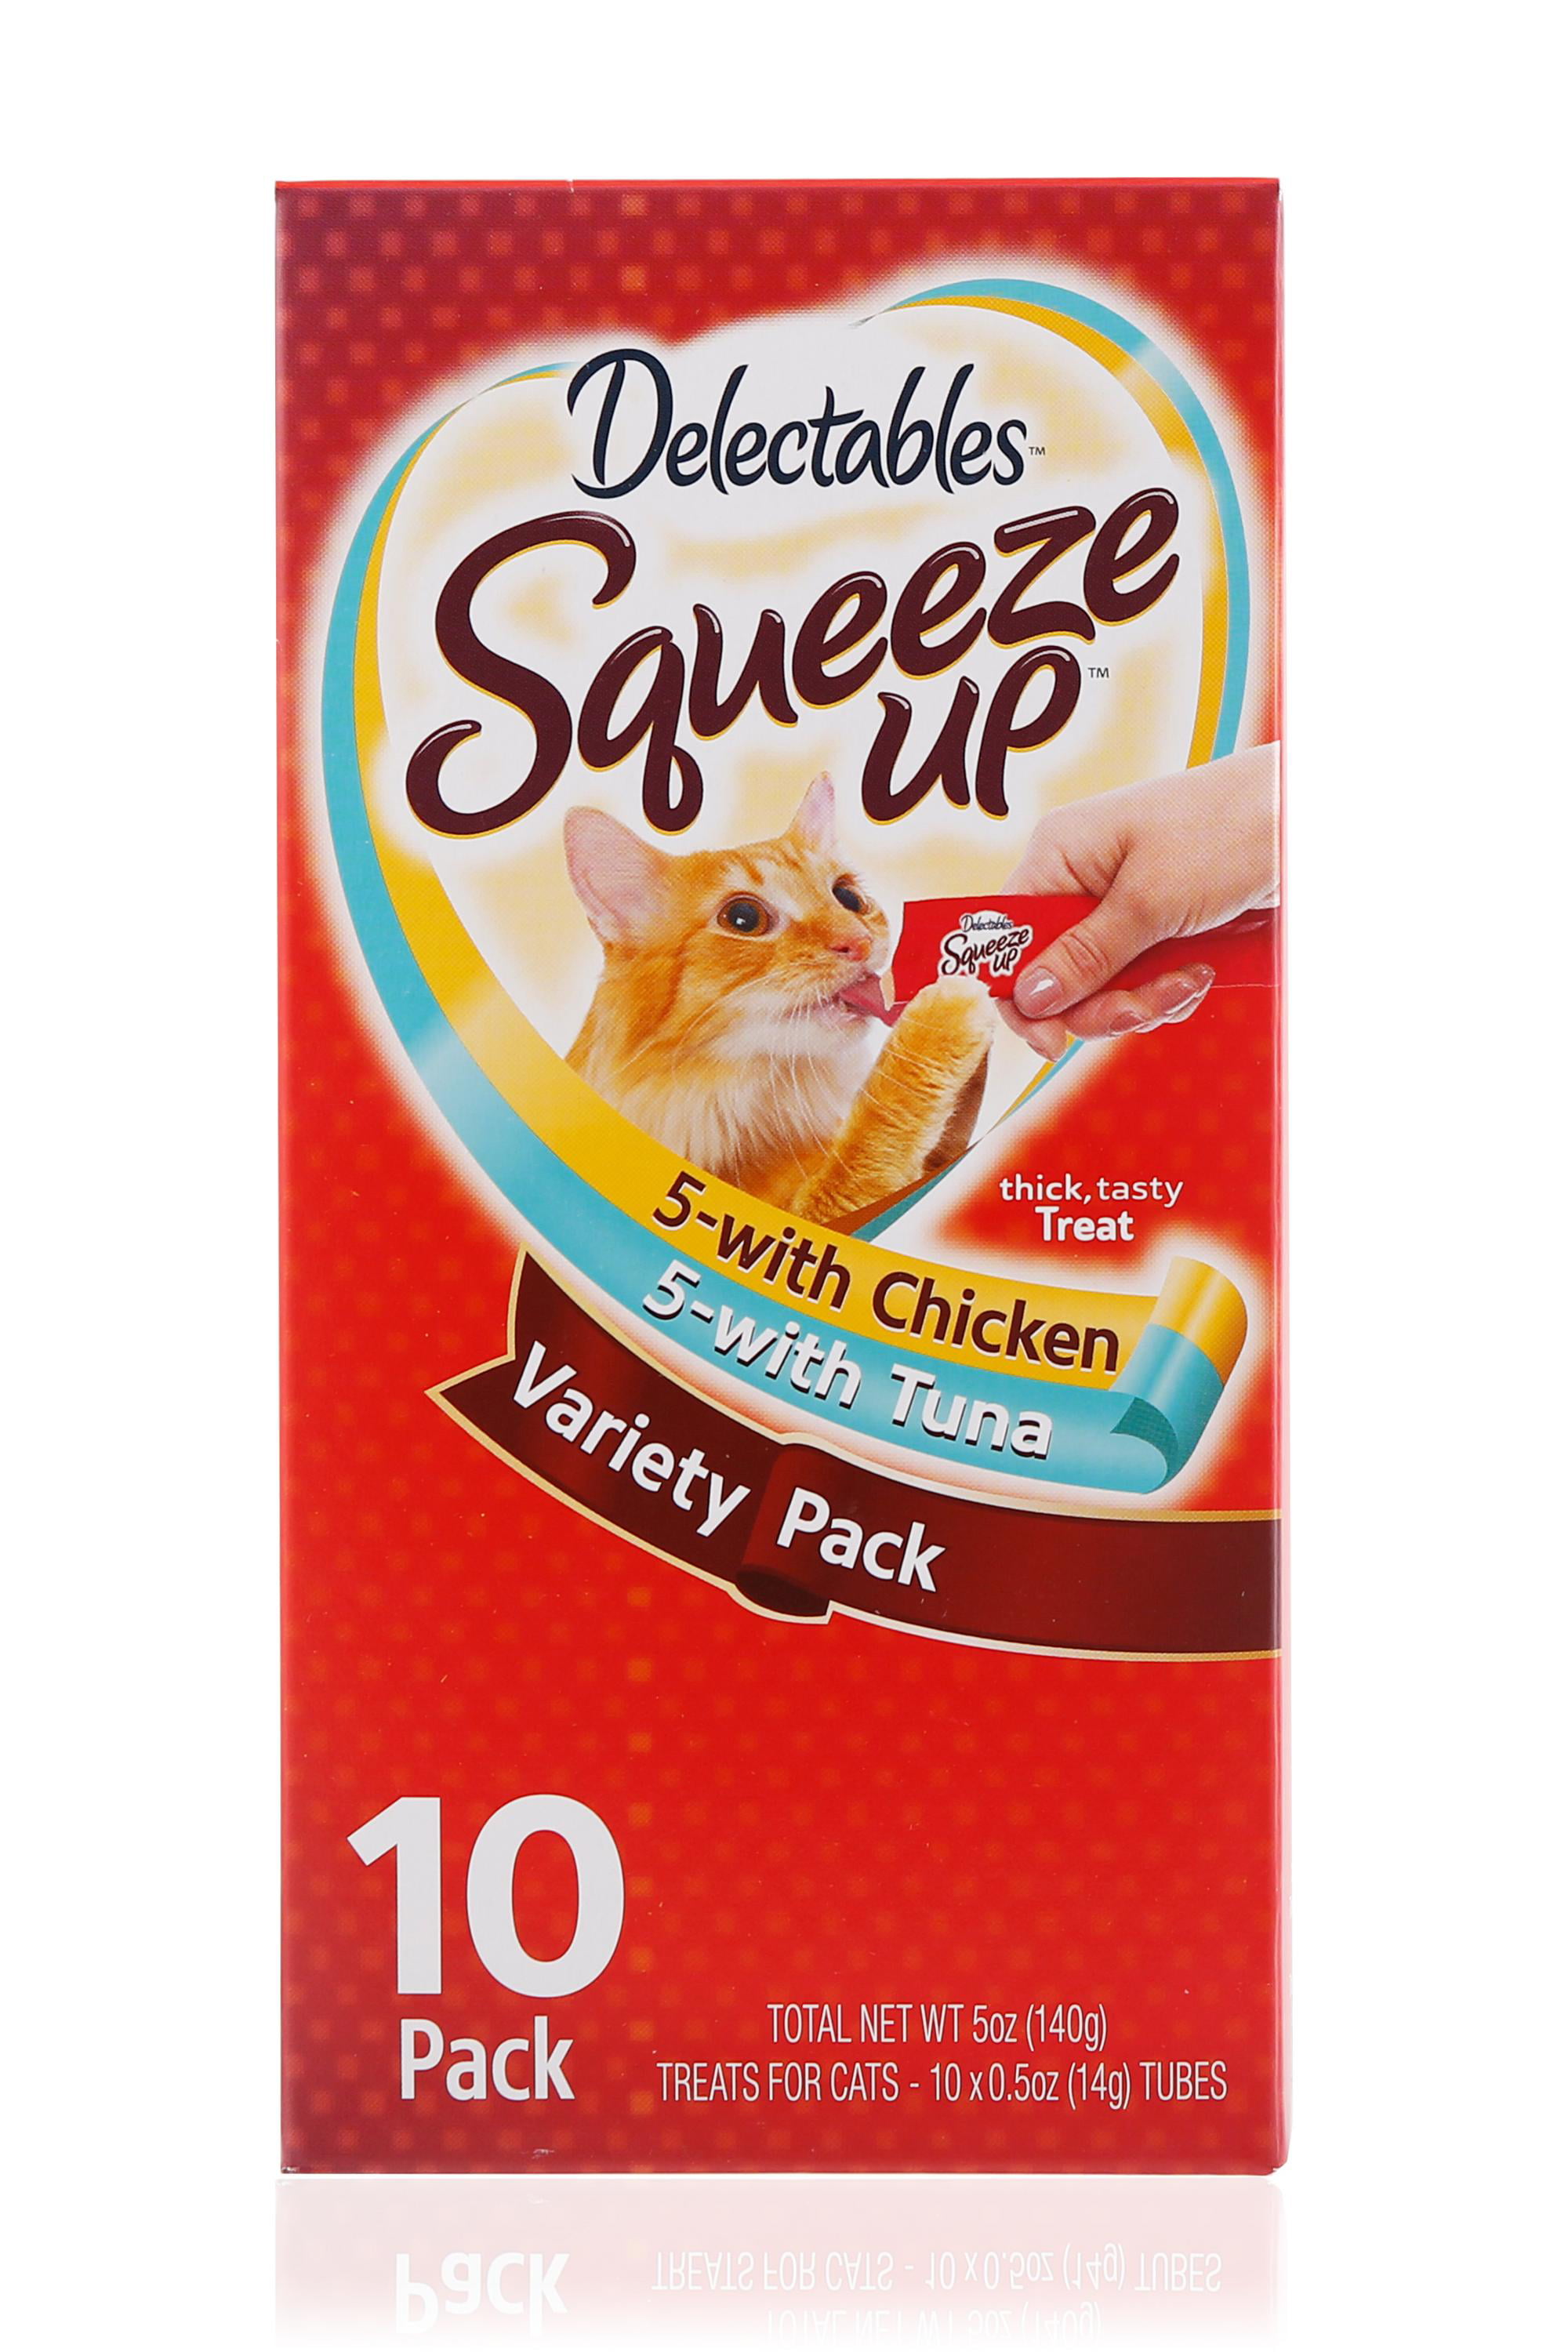 Delectables Squeeze Up Lickable Cat Treats, Chicken & Tuna Variety Pack